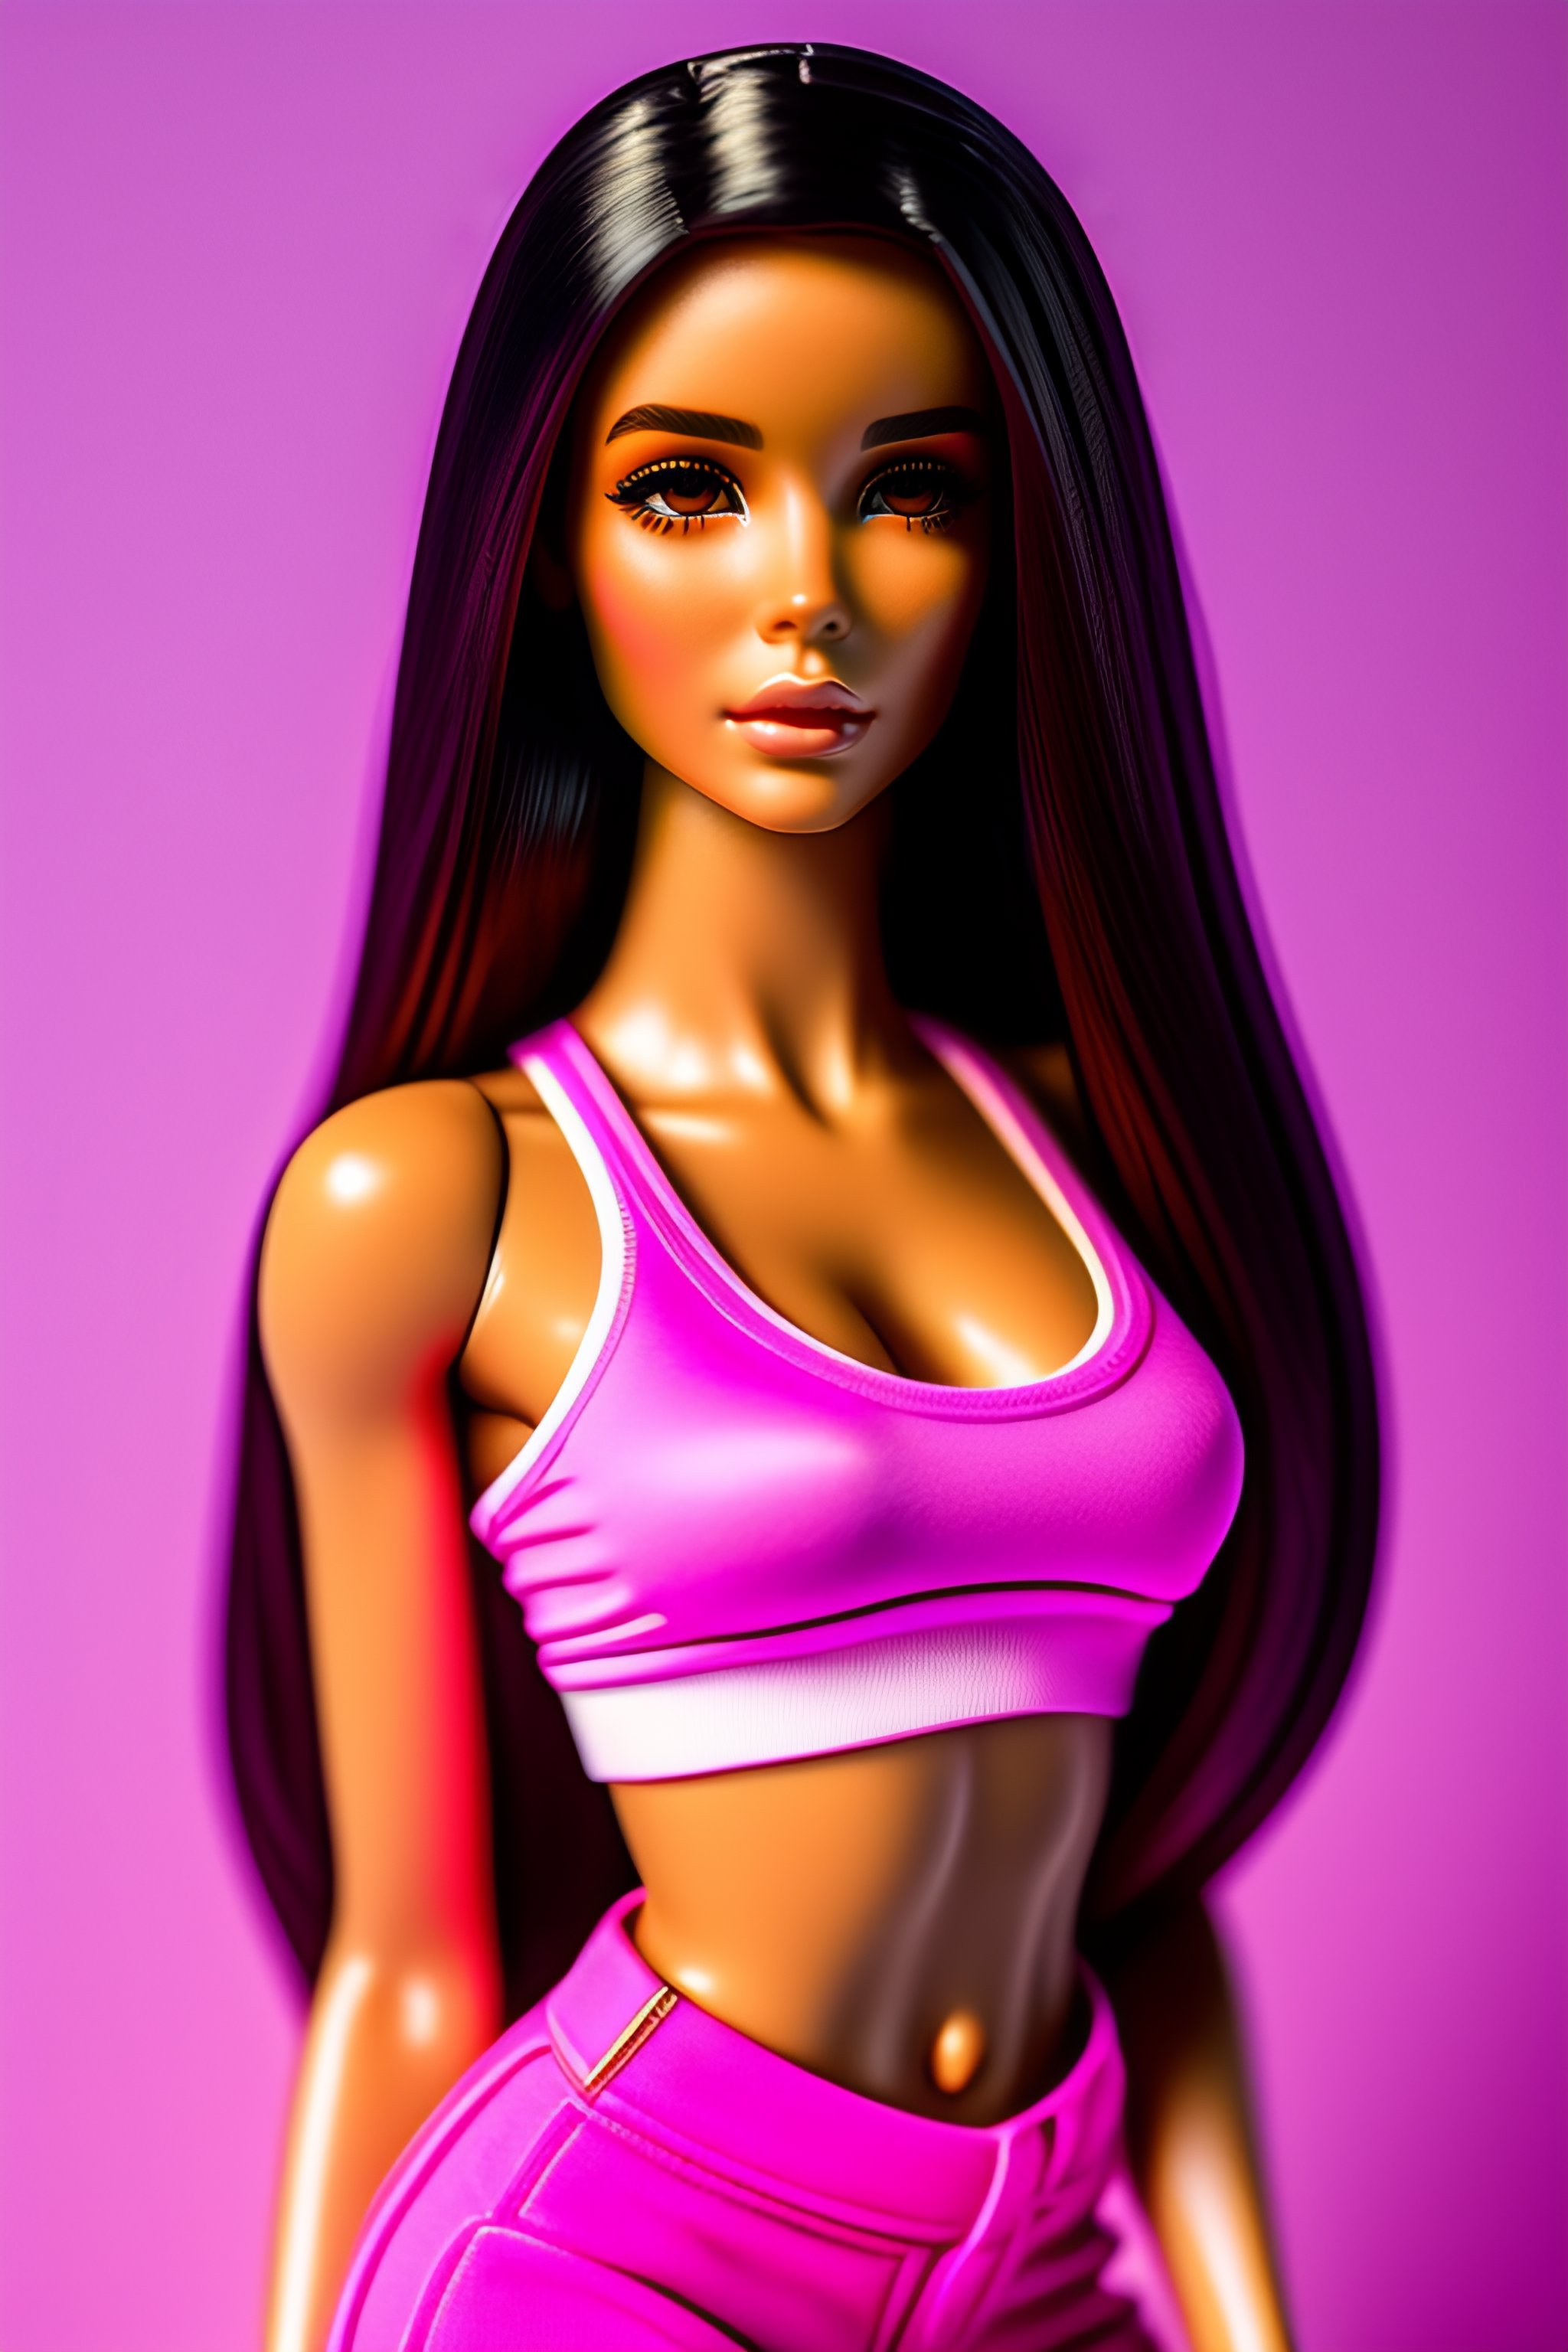 Madison beer plastic tight barbie doll body, pretty detailed  - Lexica